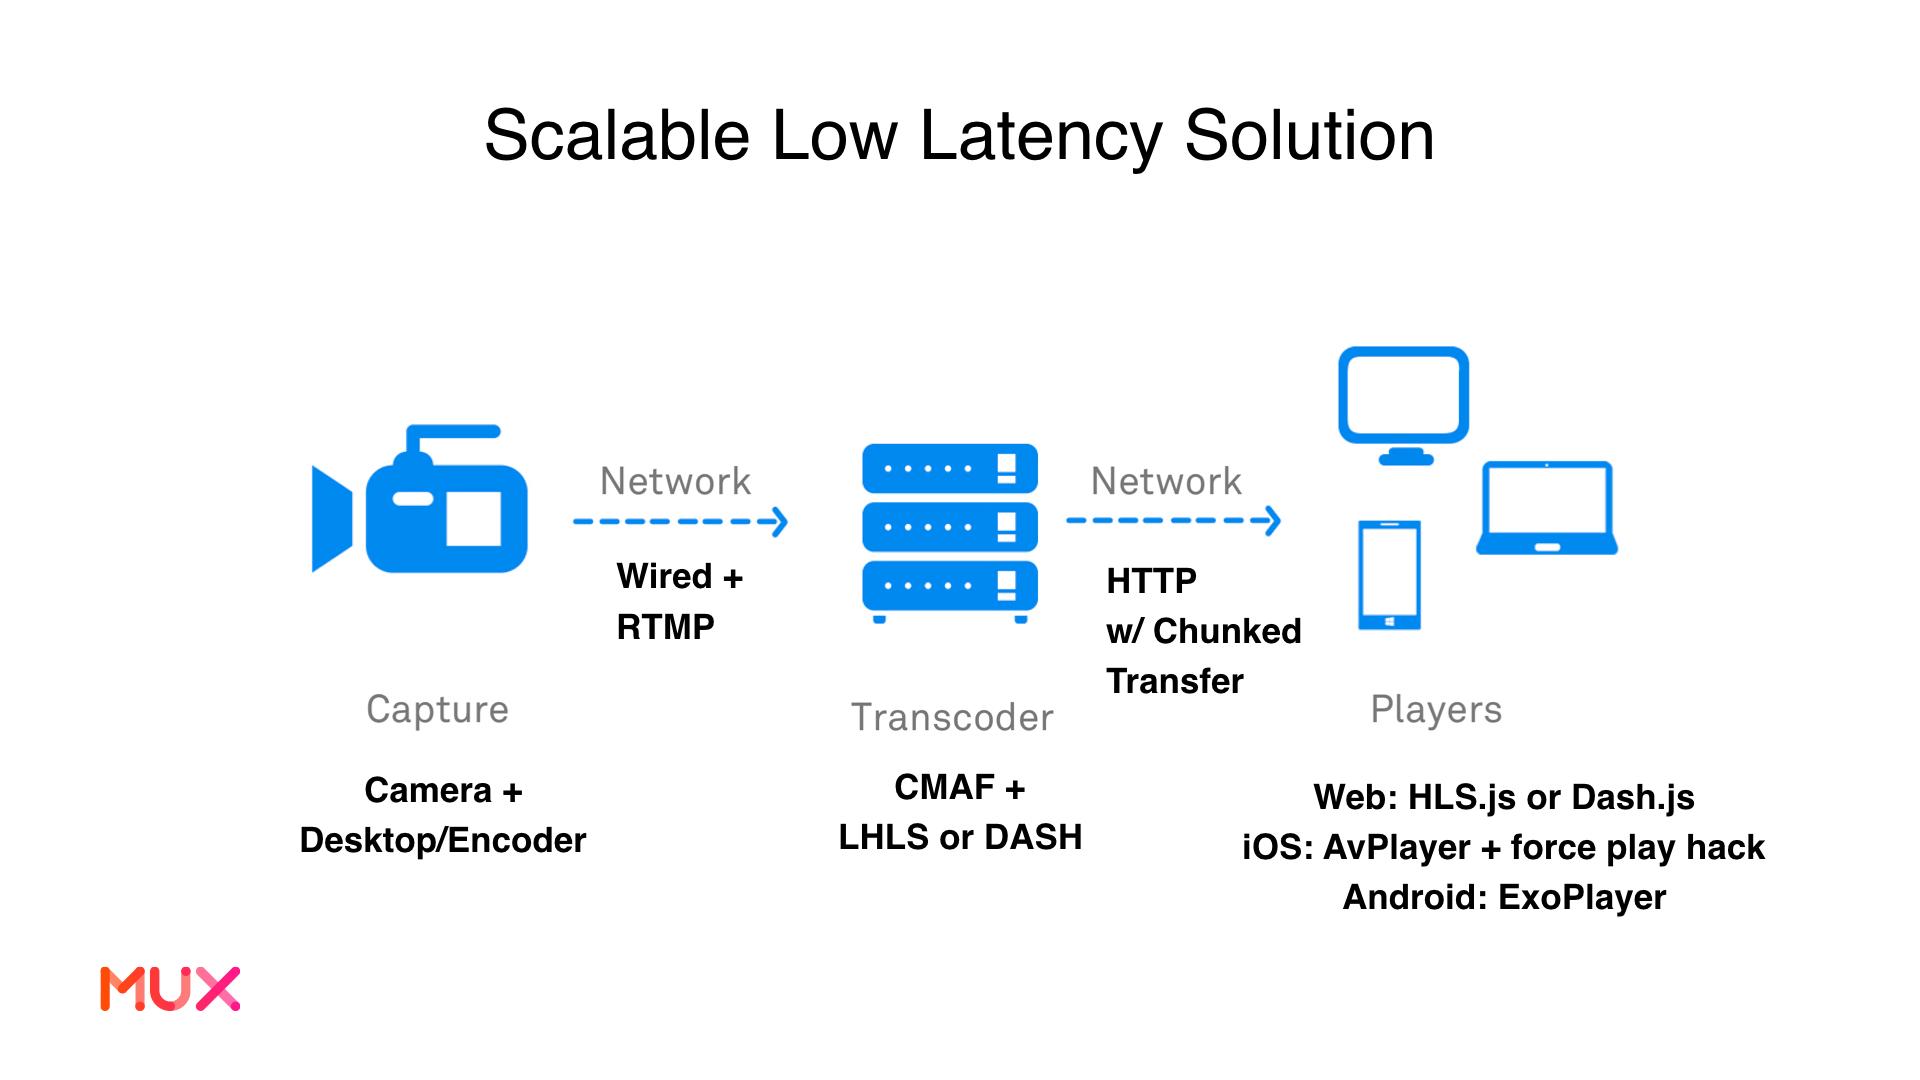 Scalable Low Latency Solution